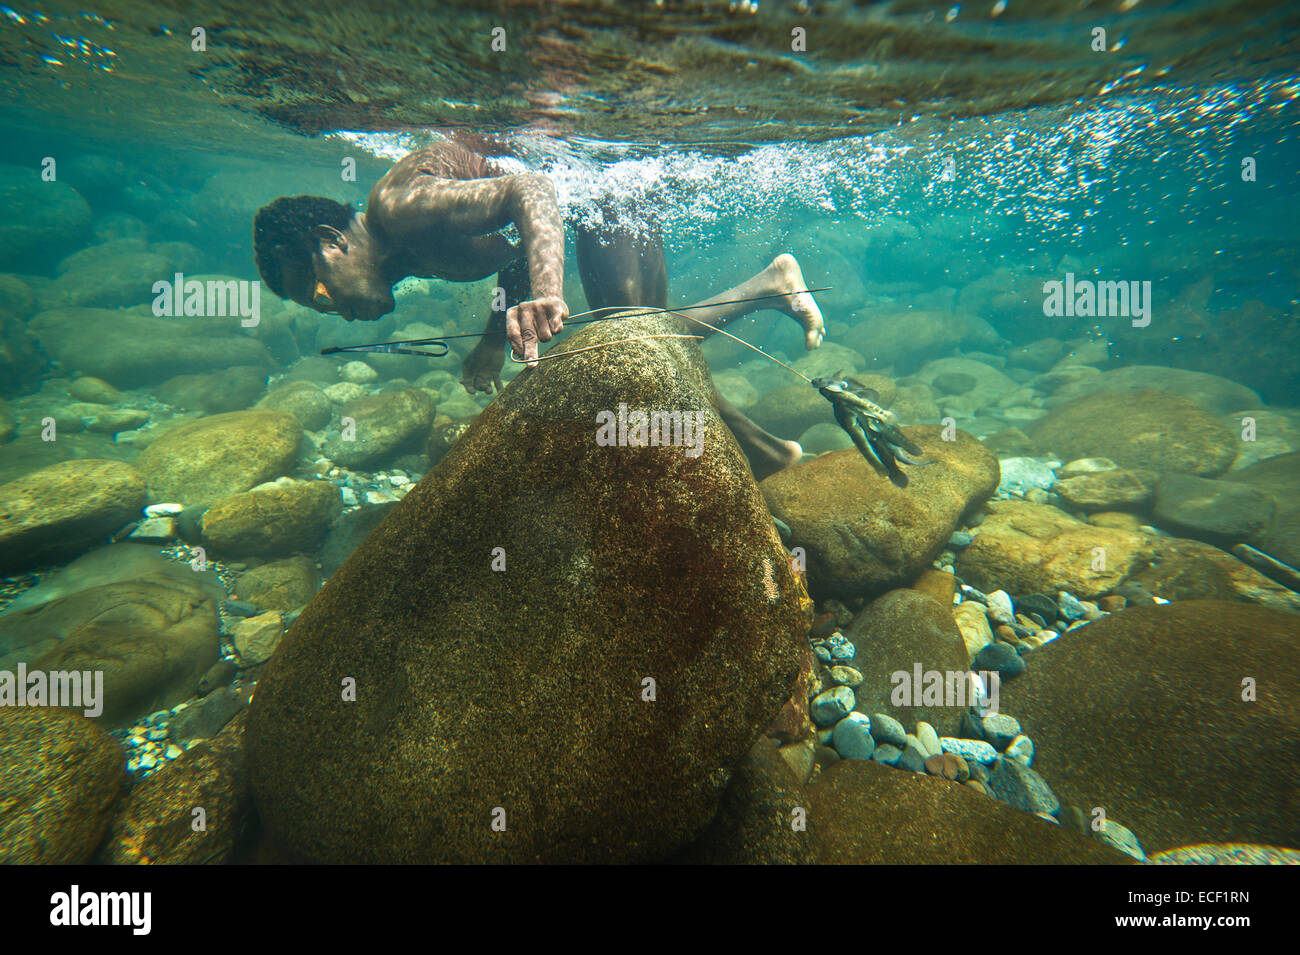 Agta man searching for fish in the clear tropical water of the Blos River Stock Photo